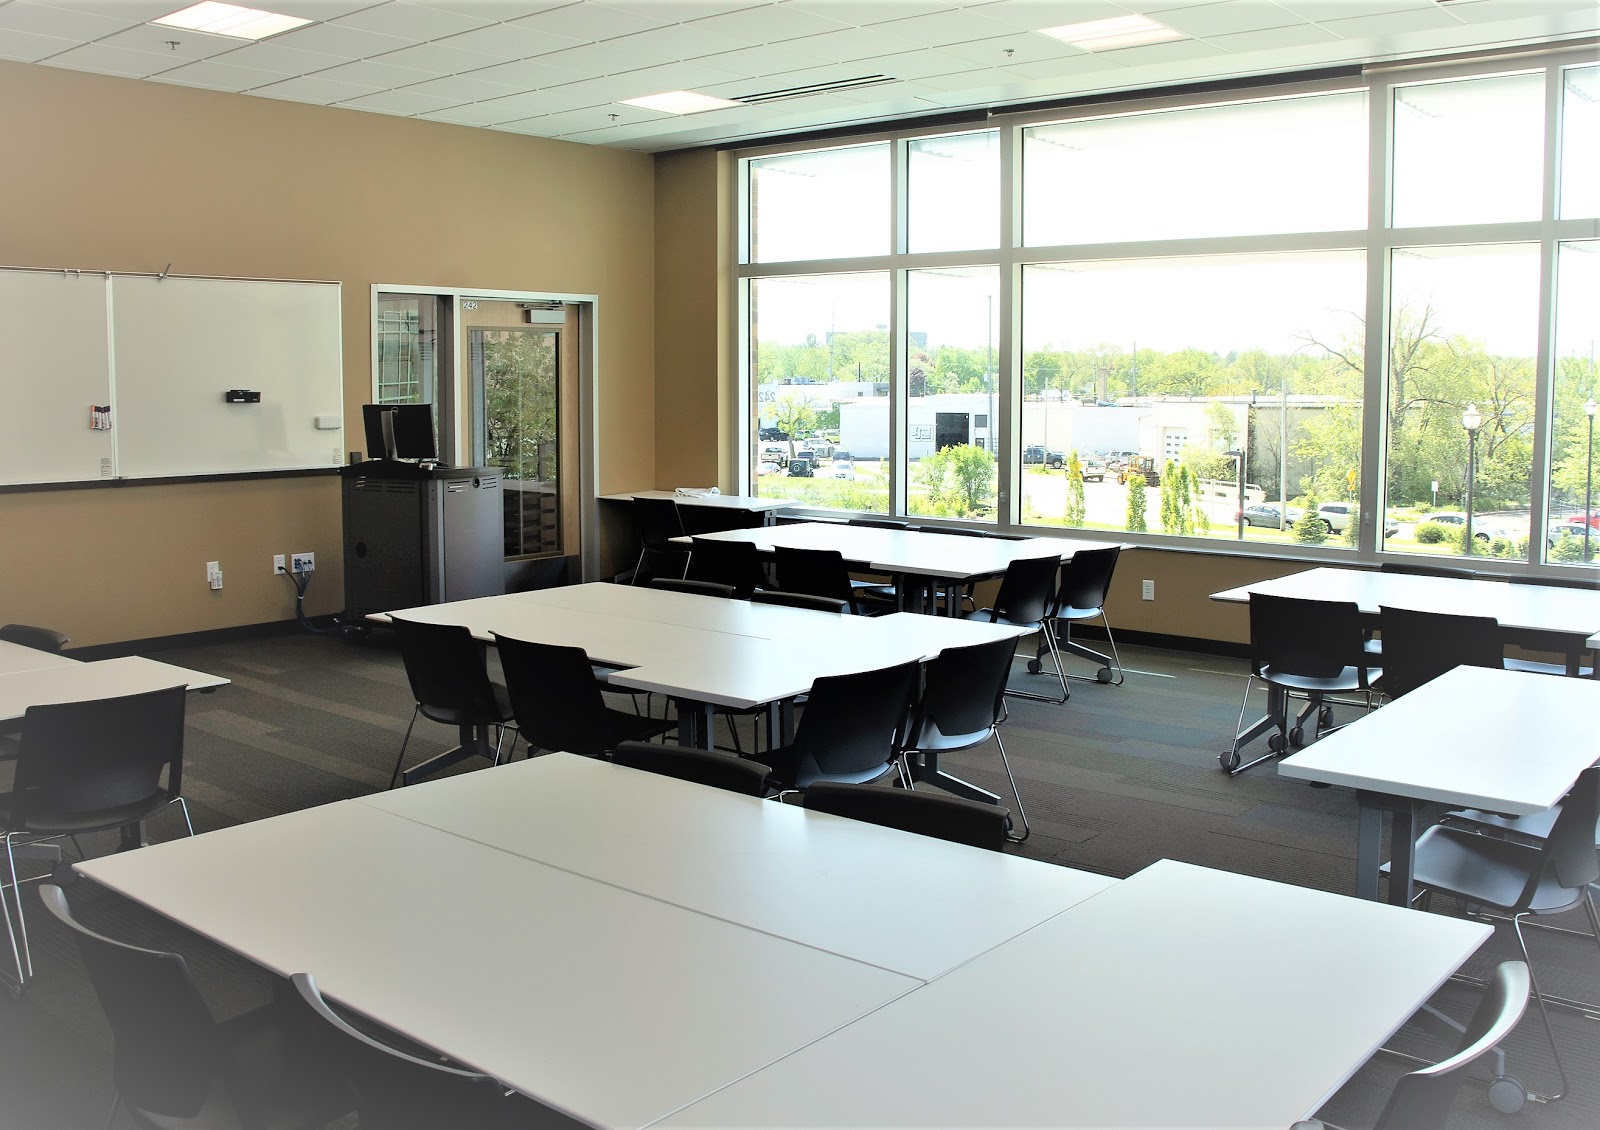 Meeting space at the Marilyn J. Schlack Culinary and Allied Health Building